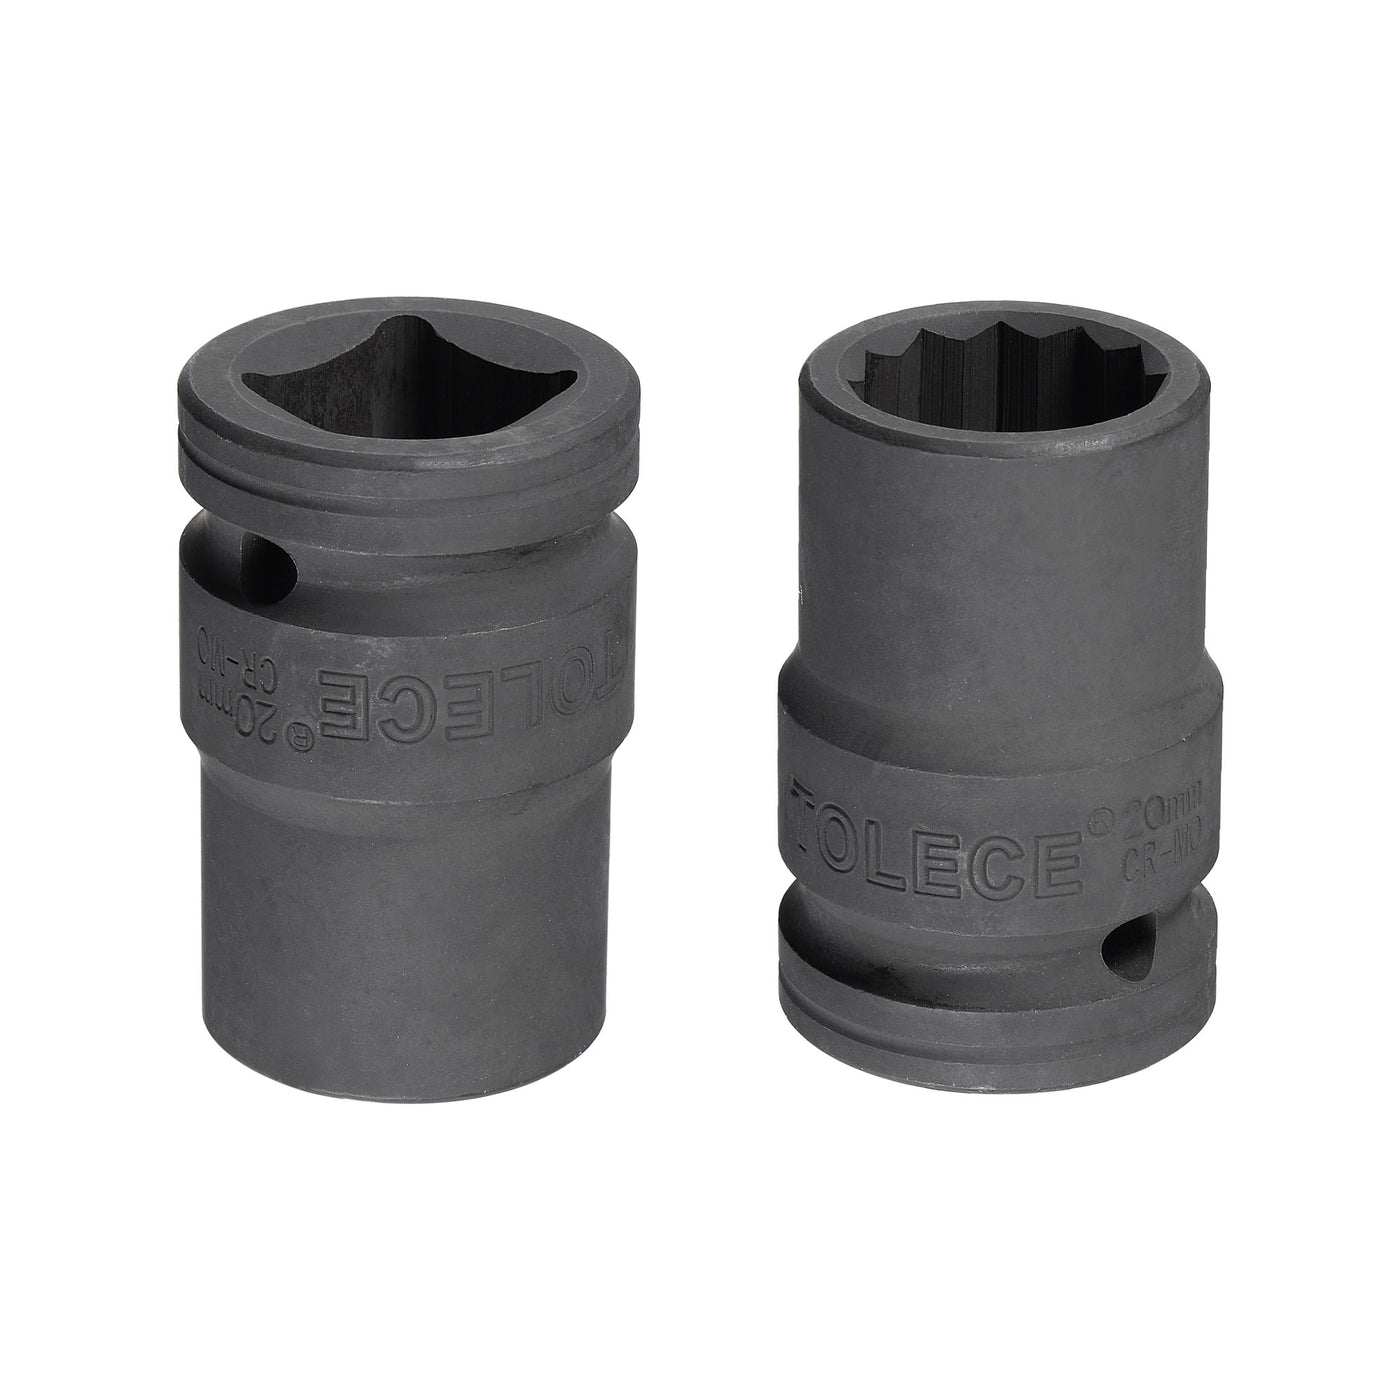 uxcell Uxcell 3/4" Drive 20mm 12-Point Impact Socket, CR-MO Steel 56mm Length, Standard Metric